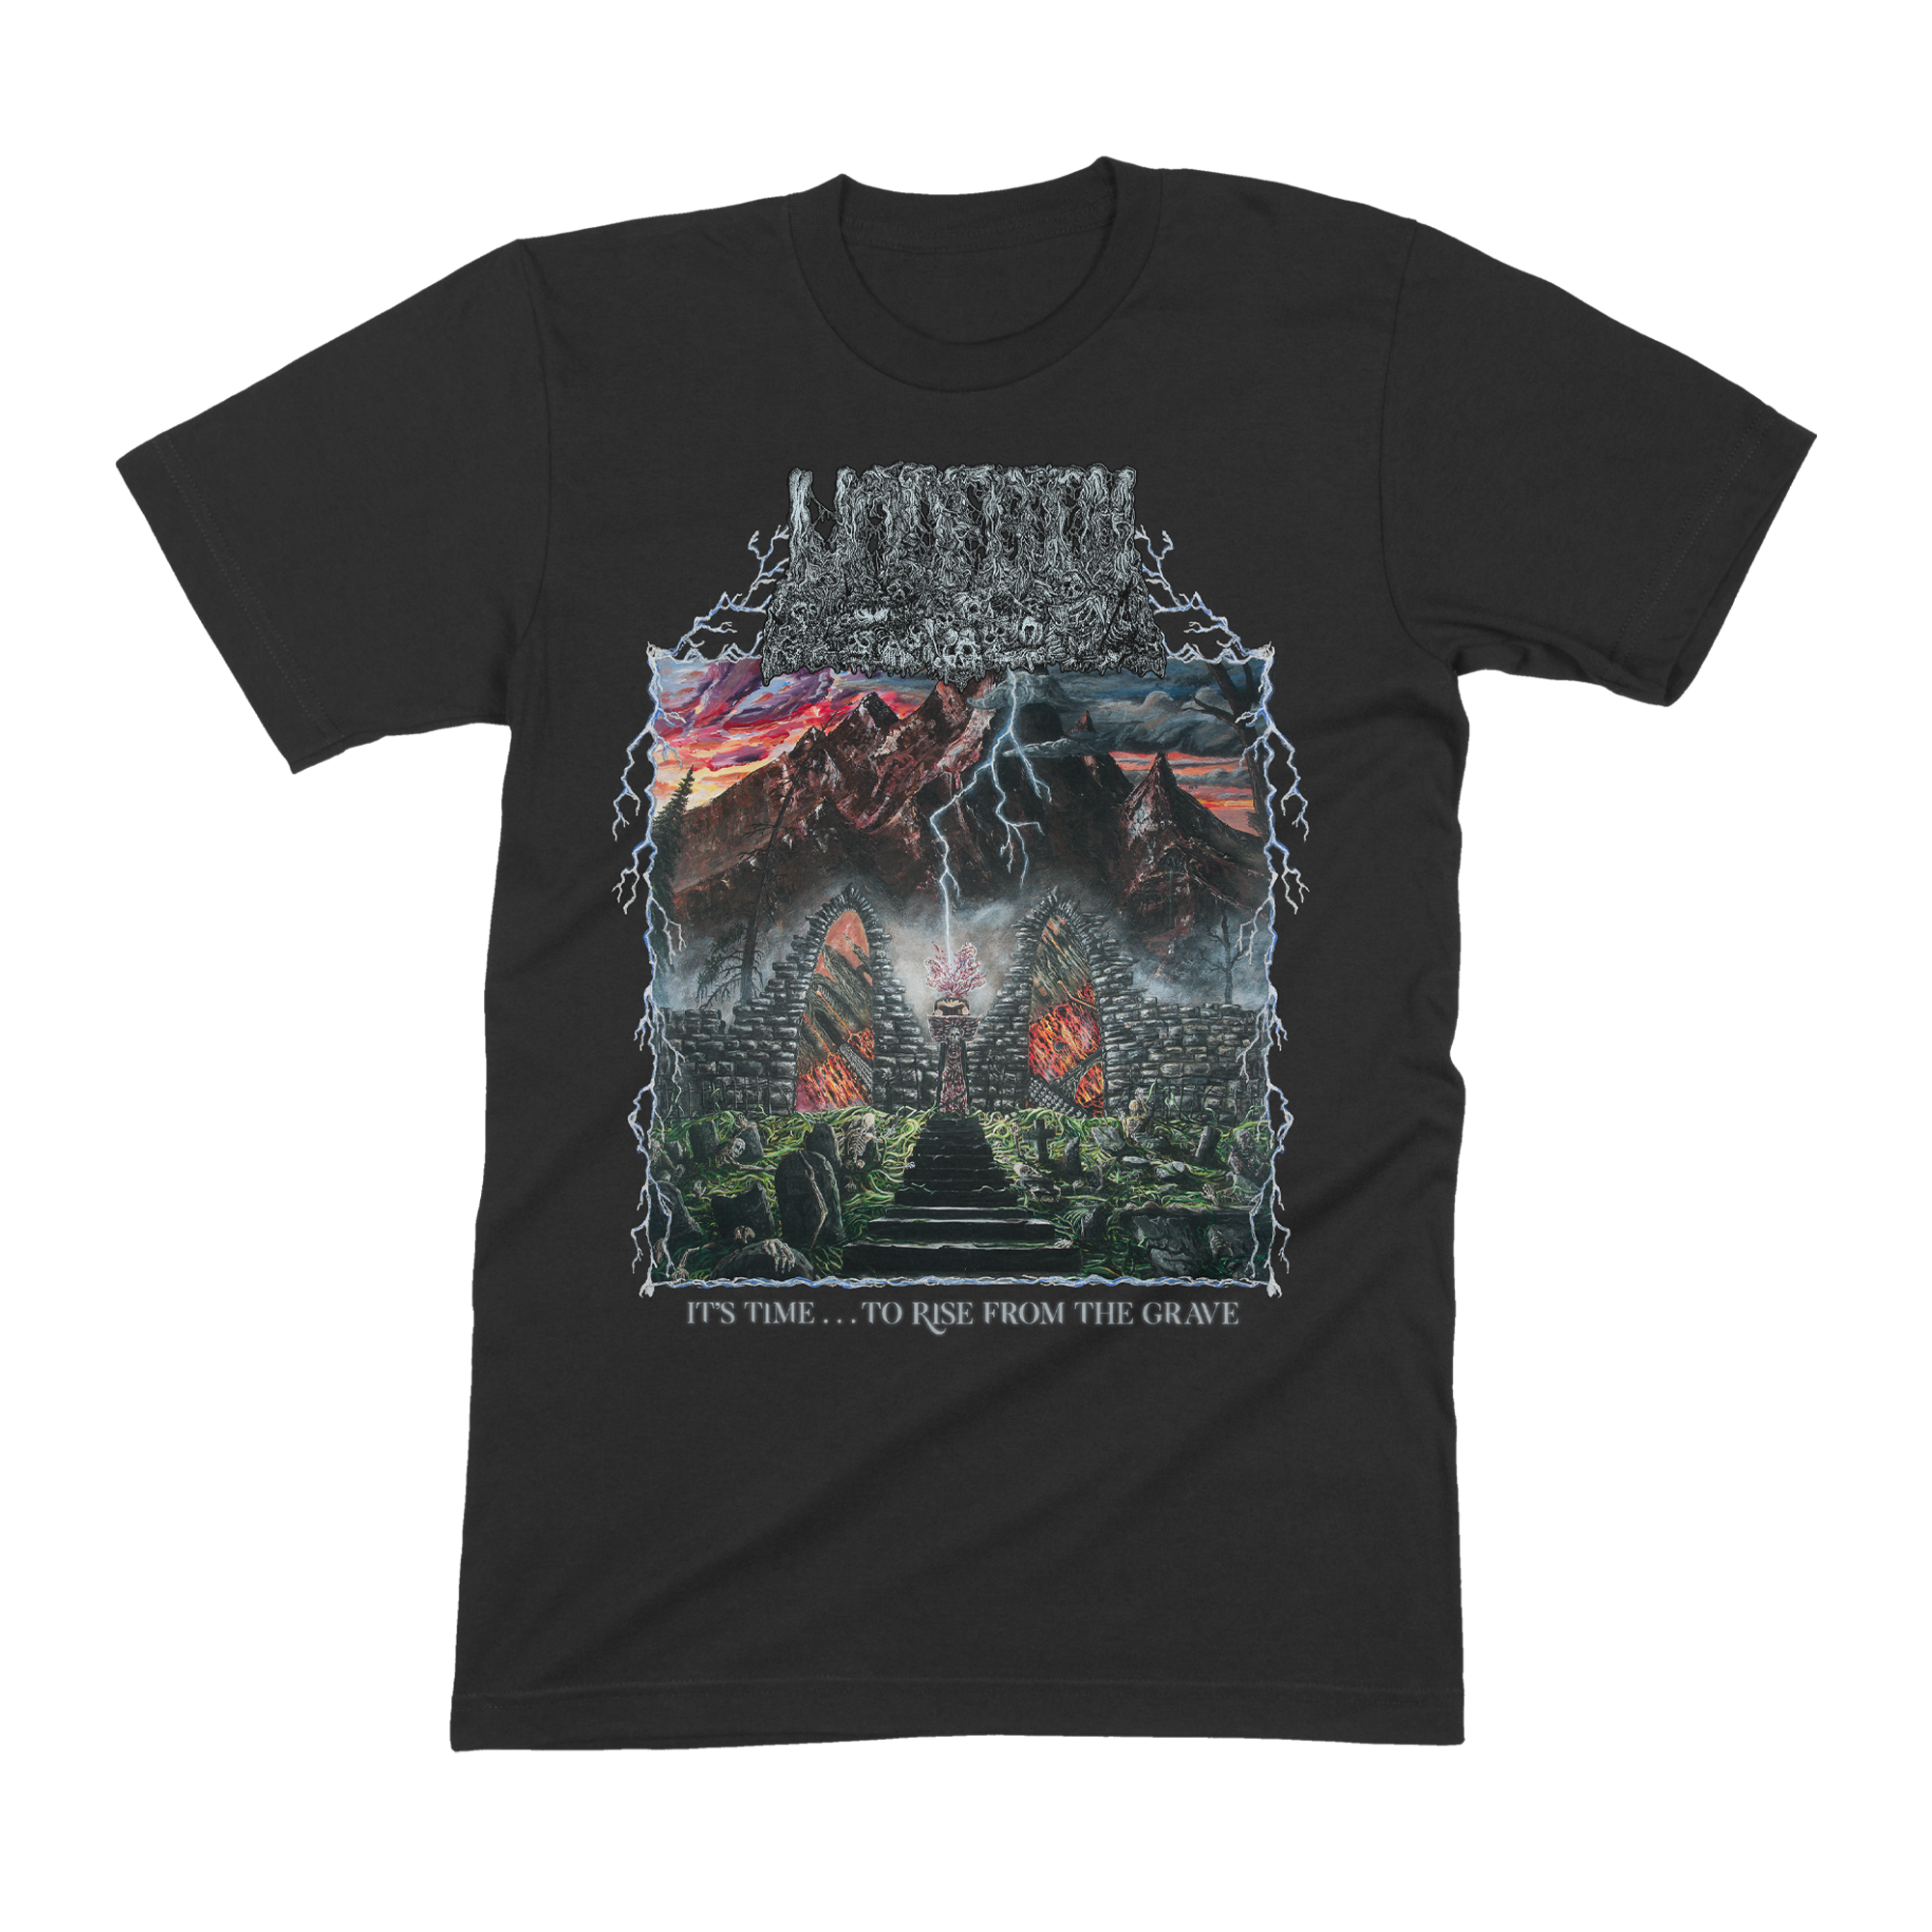 It's Time...To Rise From the Grave T-Shirt